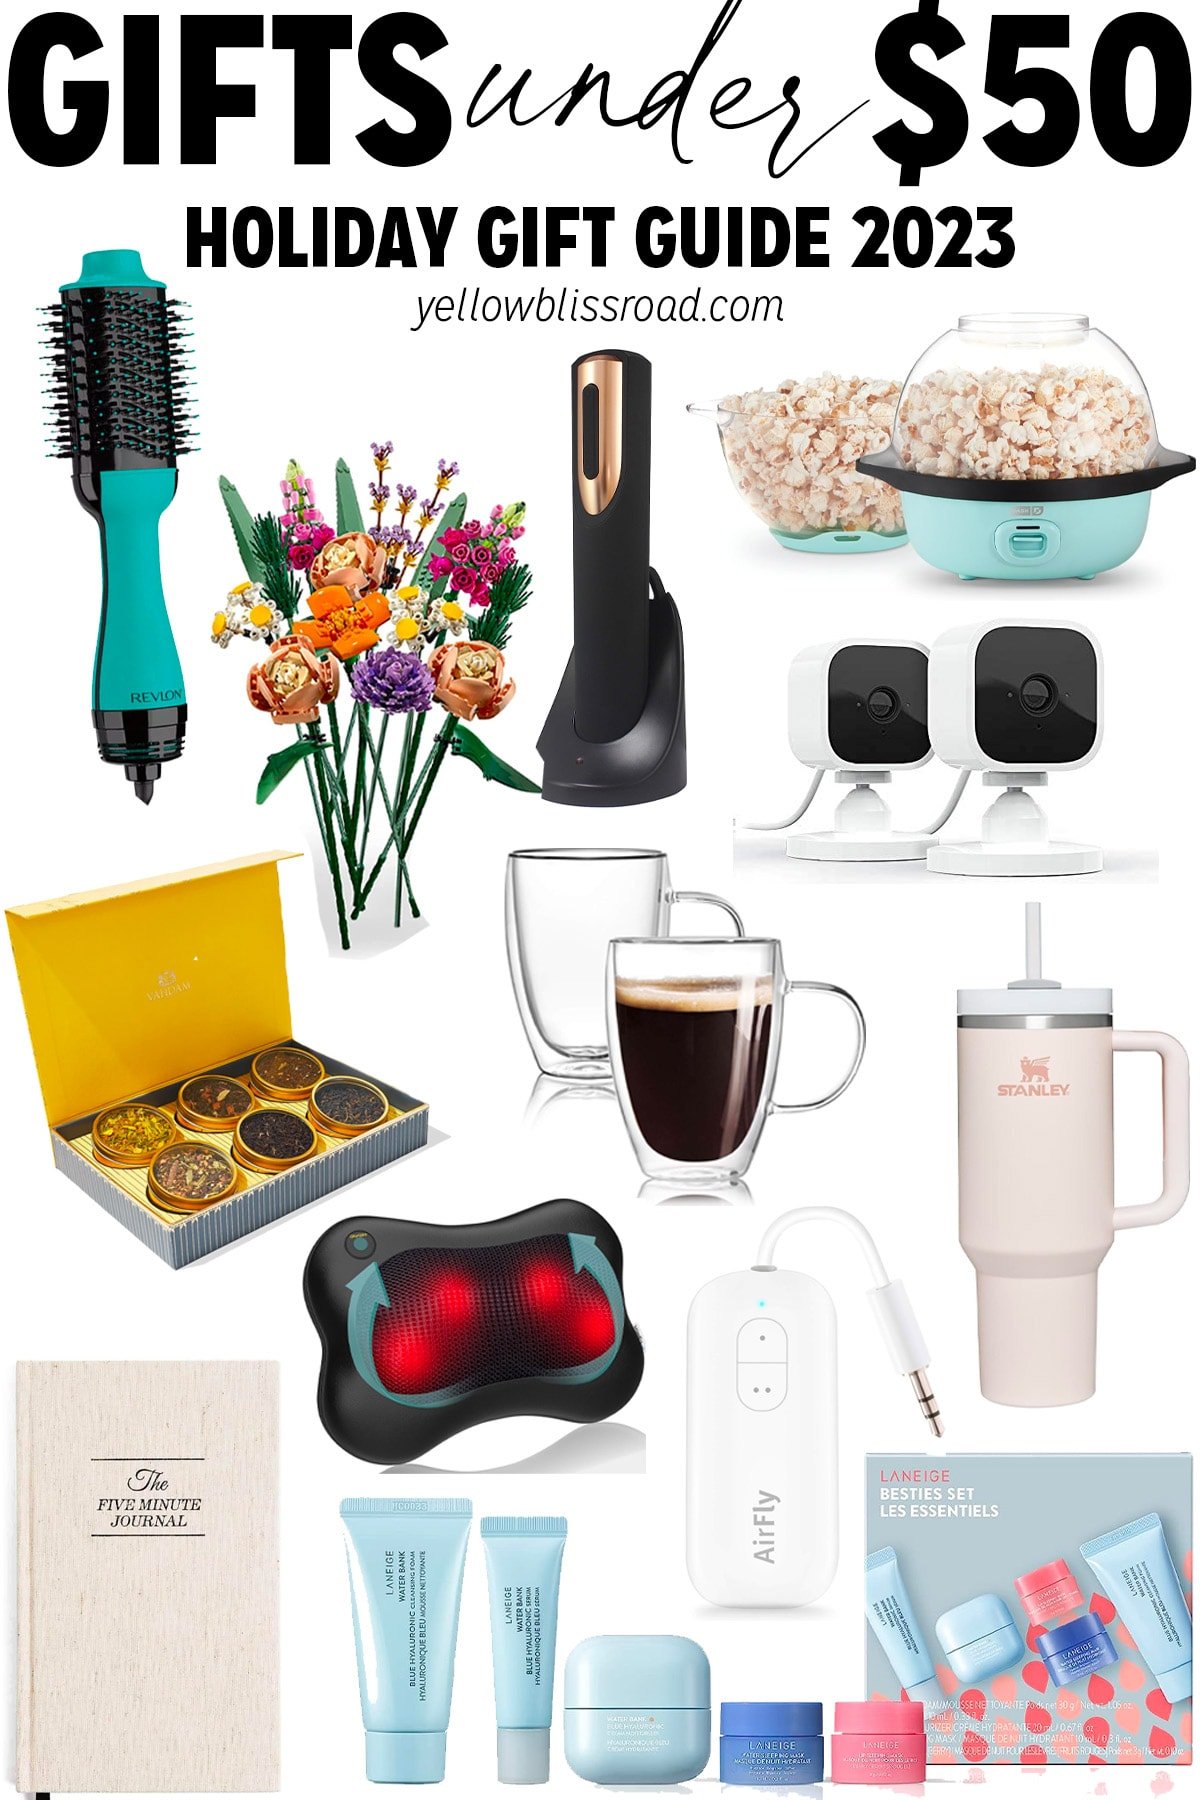 50+ Best Gifts For Female Friends Of All Ages (2023 Gift Guide)